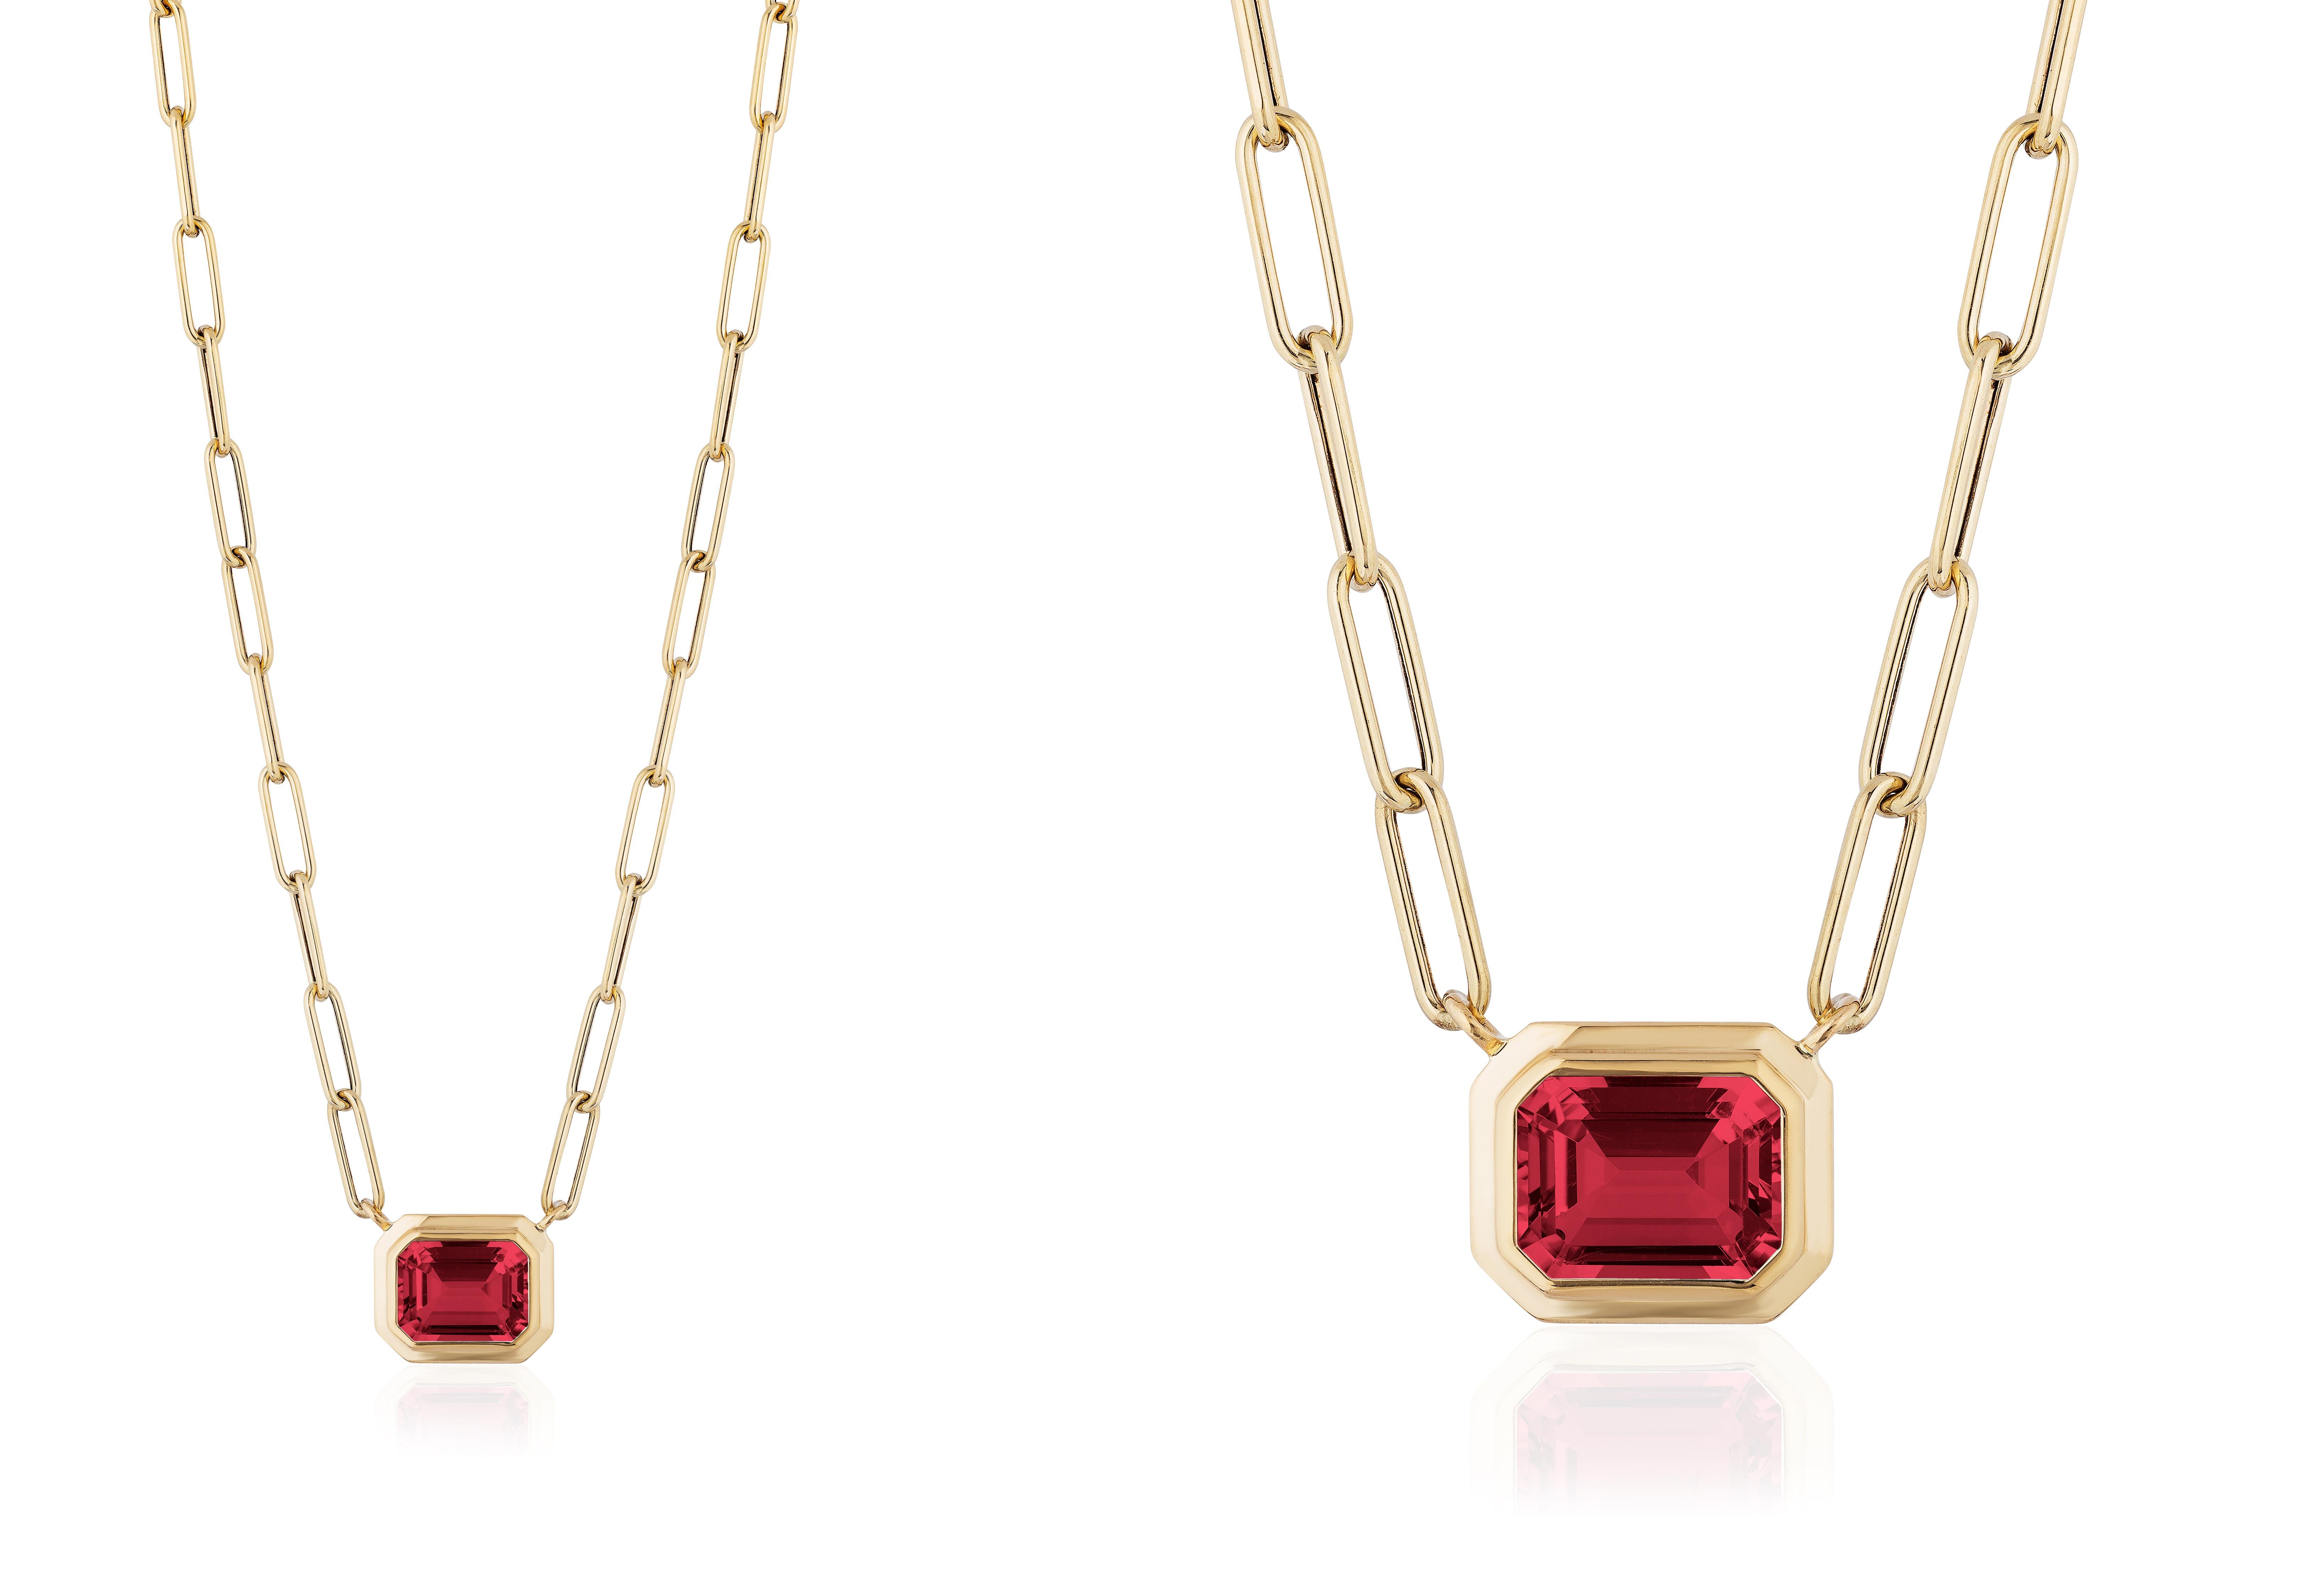 This beautiful East-West Garnet Emerald Cut Bezel Set Pendant in 18K Yellow Gold is from our ‘Manhattan’ Collection. Minimalist lines yet bold structures are what our Manhattan Collection is all about. Our pieces represent the famous skyline and